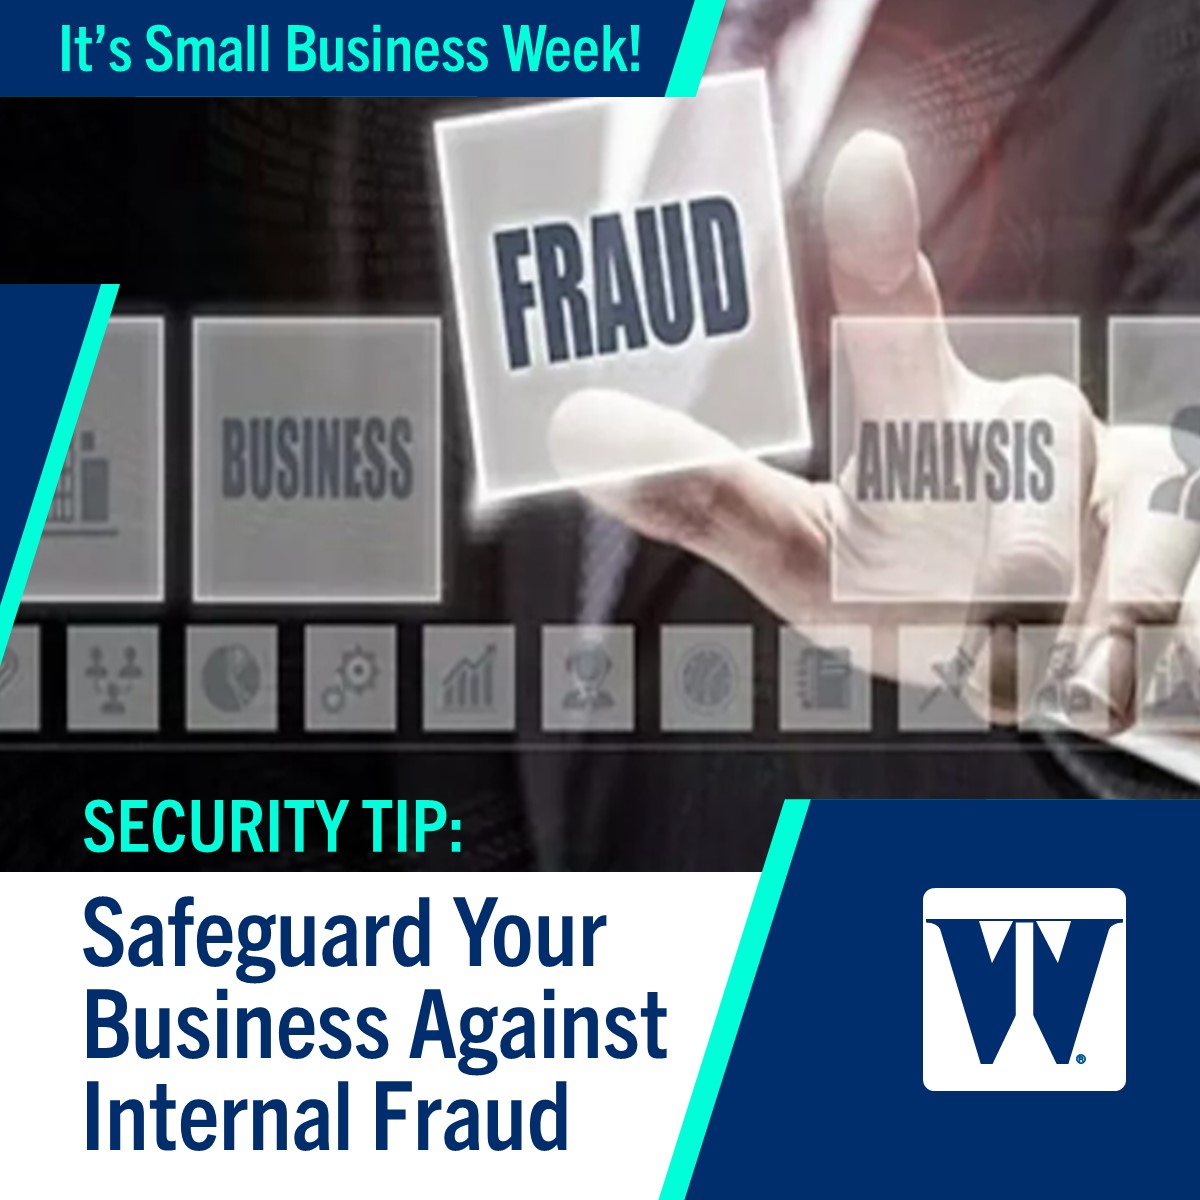 Fraud situations are especially threatening to smaller enterprises. The first step to shielding your business from extortion is to be aware of some scenarios: ▶️ ow.ly/NNi050Rrftz __ What we value is you.™ #WashTrust #SmallBusinessWeek #SmallBiz #SecurityTips #Fraud